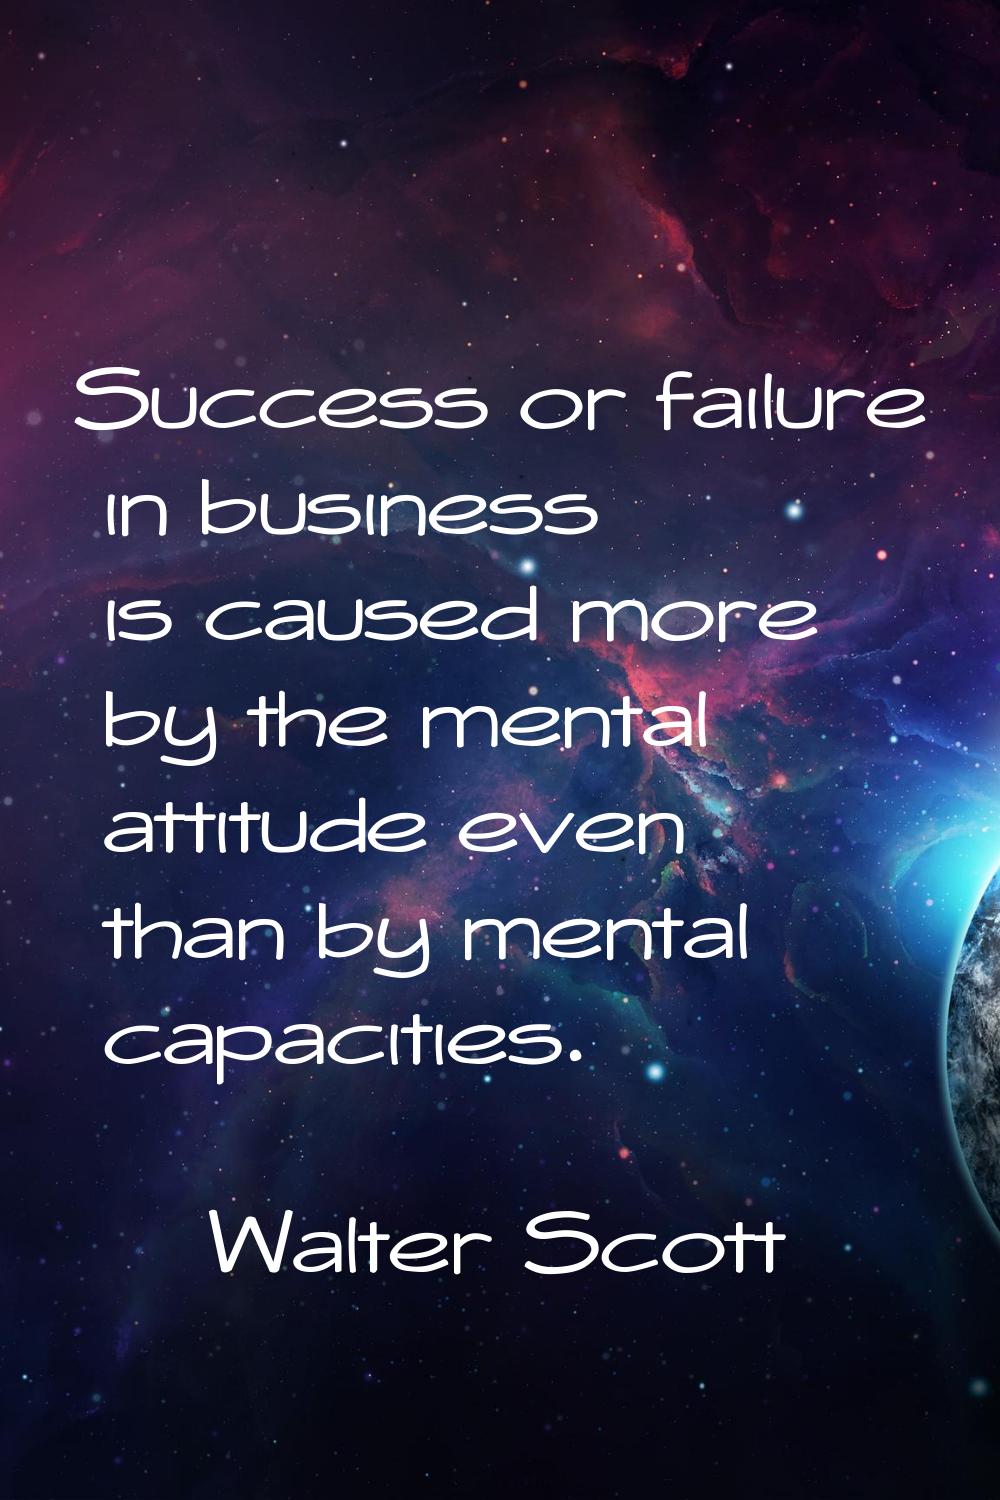 Success or failure in business is caused more by the mental attitude even than by mental capacities